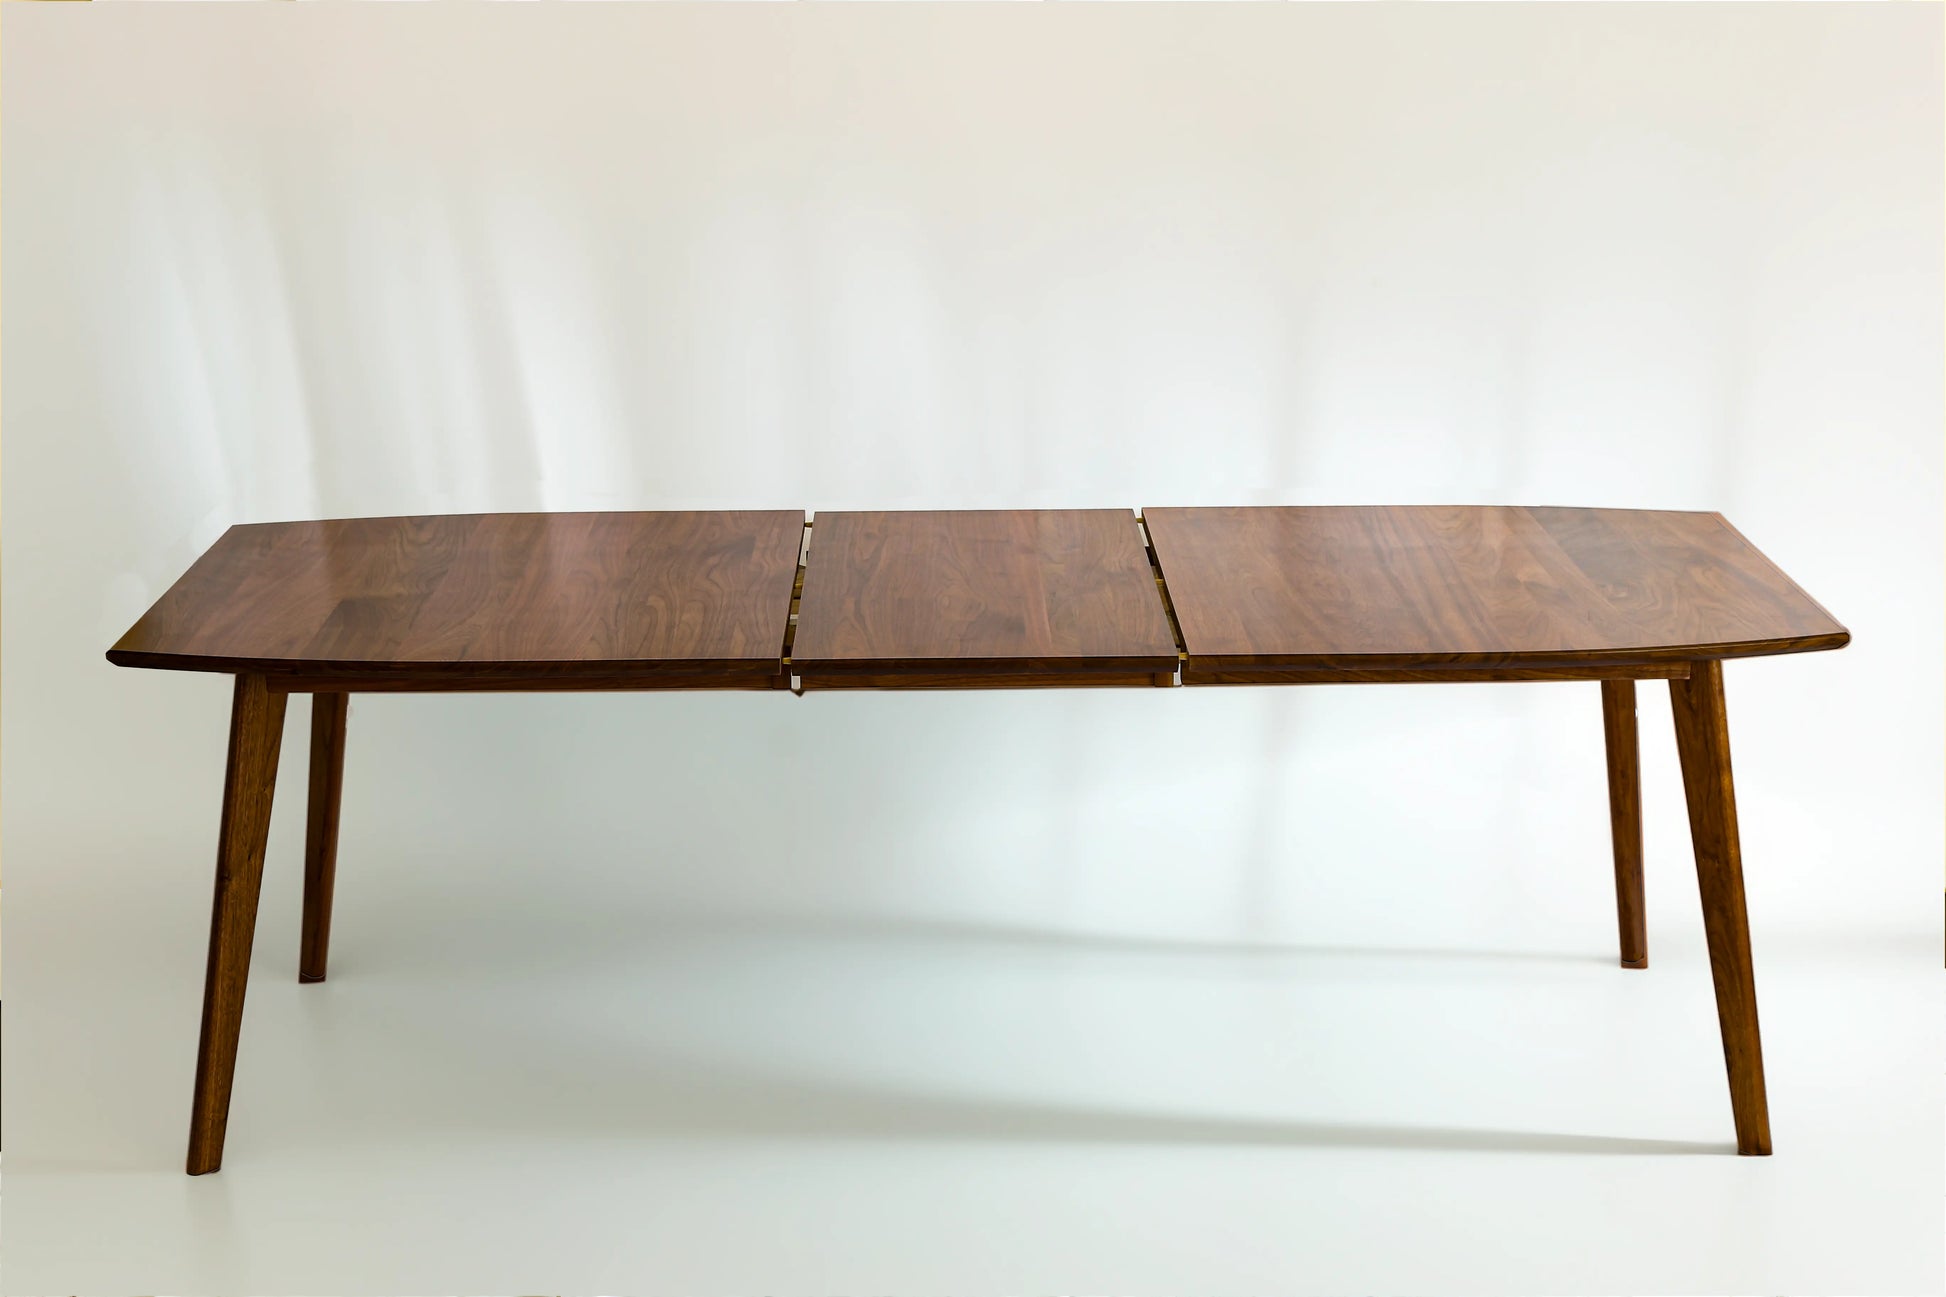 The Santa Monica Extension Table: Classic Mid Century Modern Dining Table Moderncre8ve